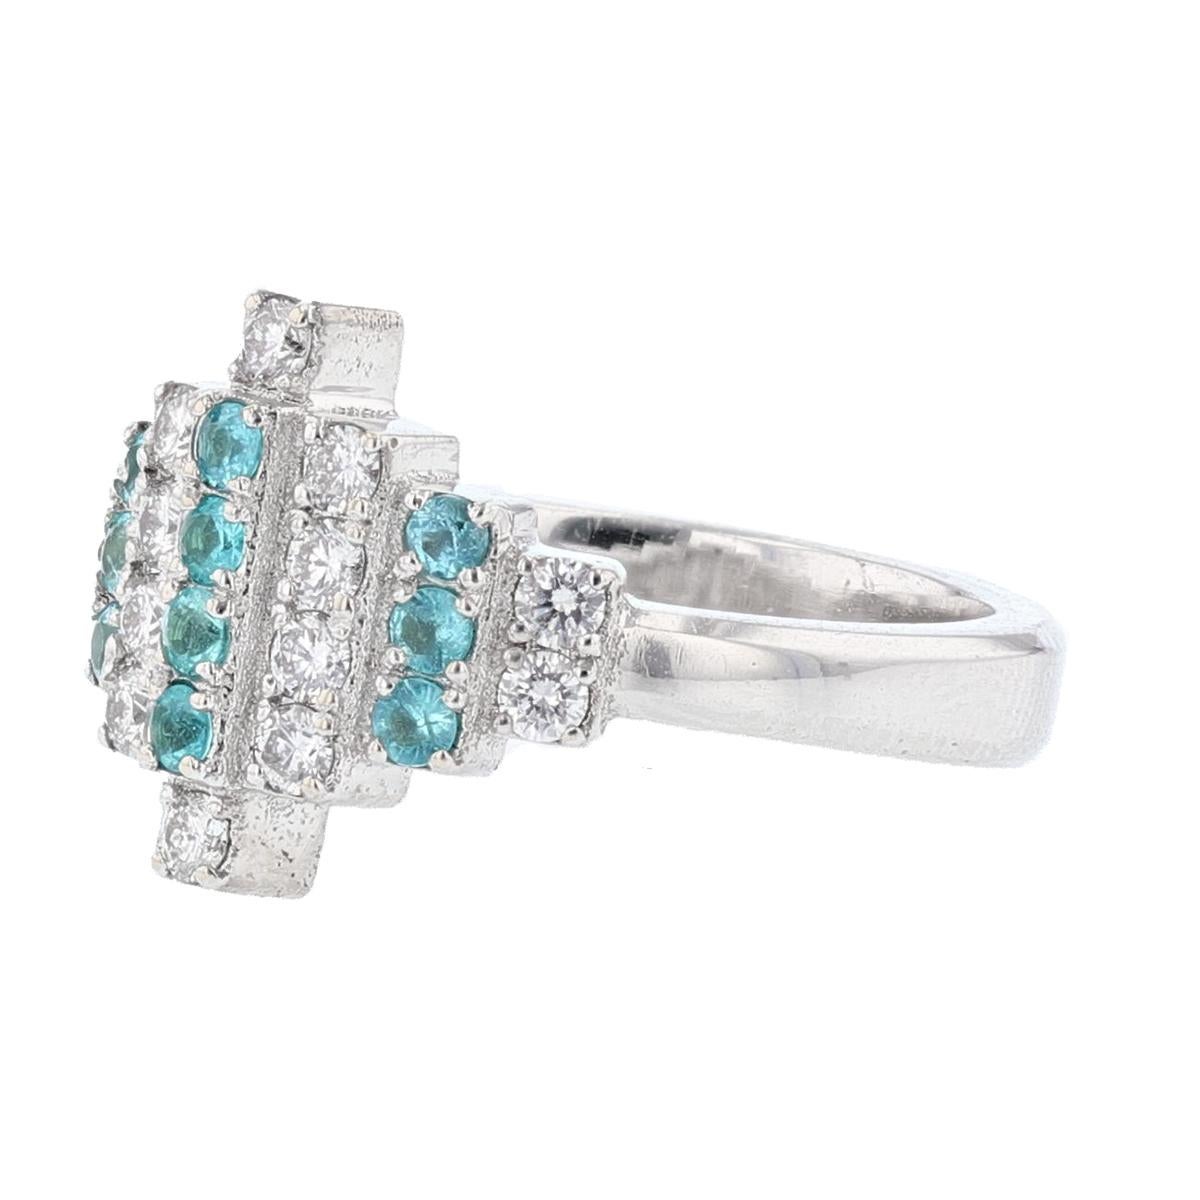 This ring is made in 18K white gold and features 10 round cut, prong set Paraiba Tourmalines weighing 0.24ct and 14 round cut, prong set diamonds weighing 0.38ct with a color grade (G) and clarity grade (SI1). 